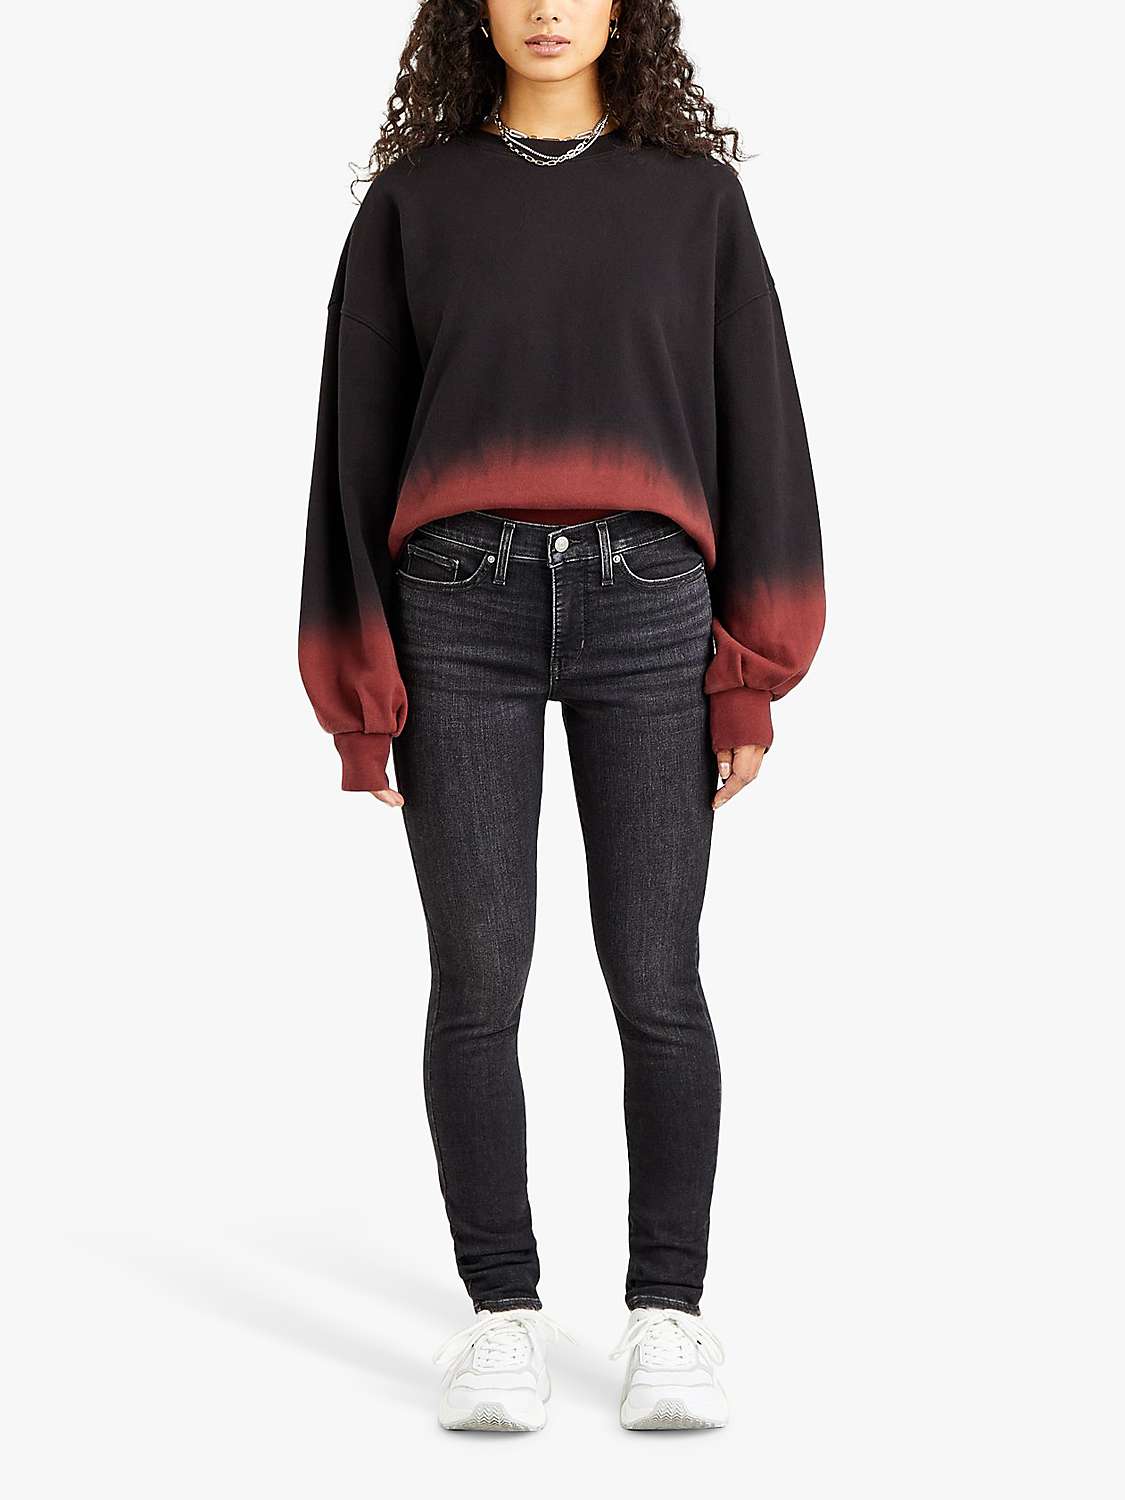 Buy Levi's 311 Shaping Skinny Jeans, Pebble Grey Online at johnlewis.com